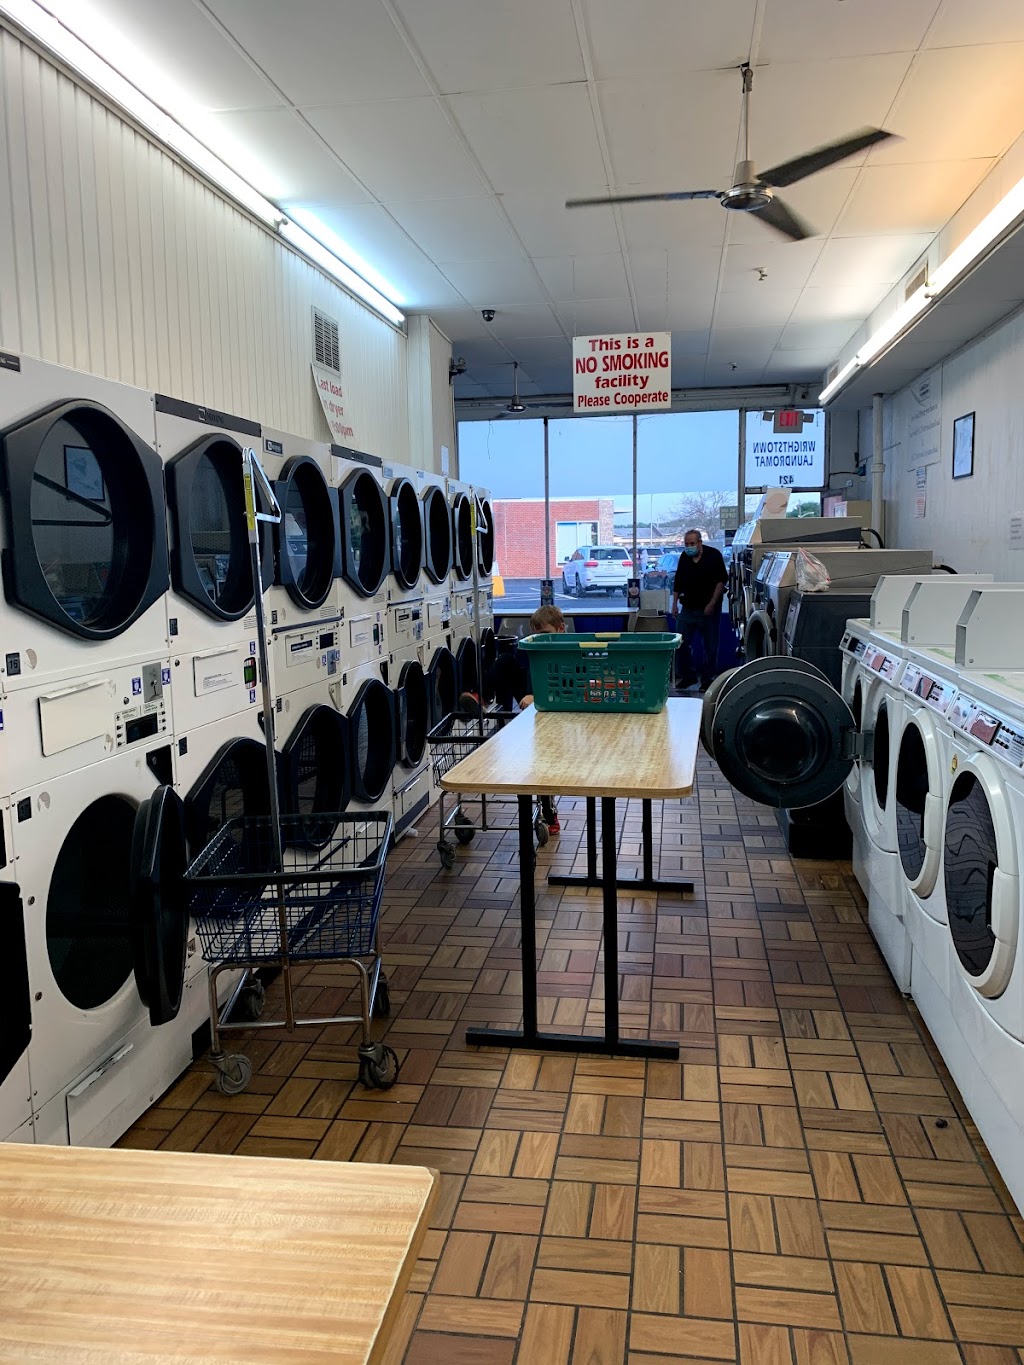 Wrightstown Laundromat | 421 Wrightstown Cookstown Rd, Wrightstown, NJ 08562 | Phone: (609) 723-2467